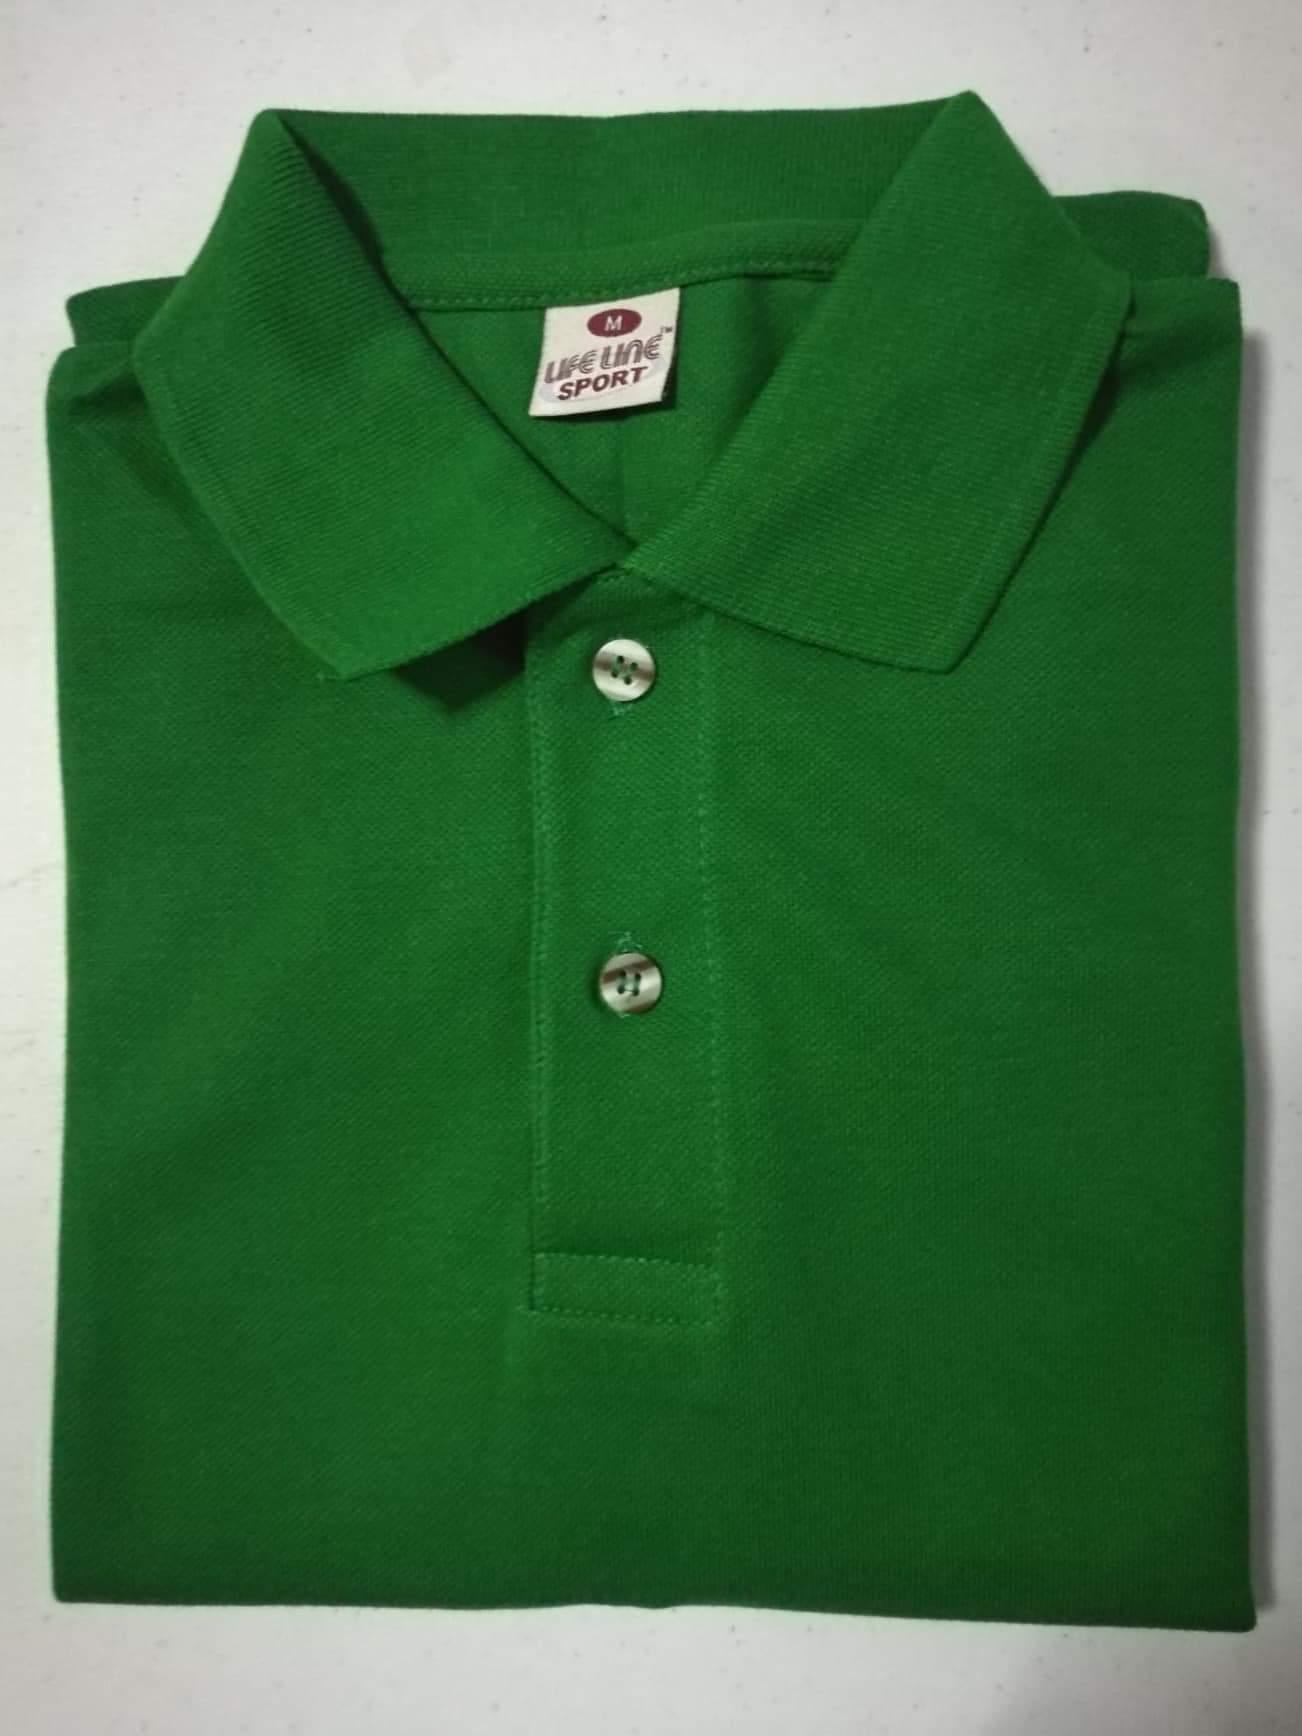 You are currently viewing Lifeline Polo Shirt – Tagum City